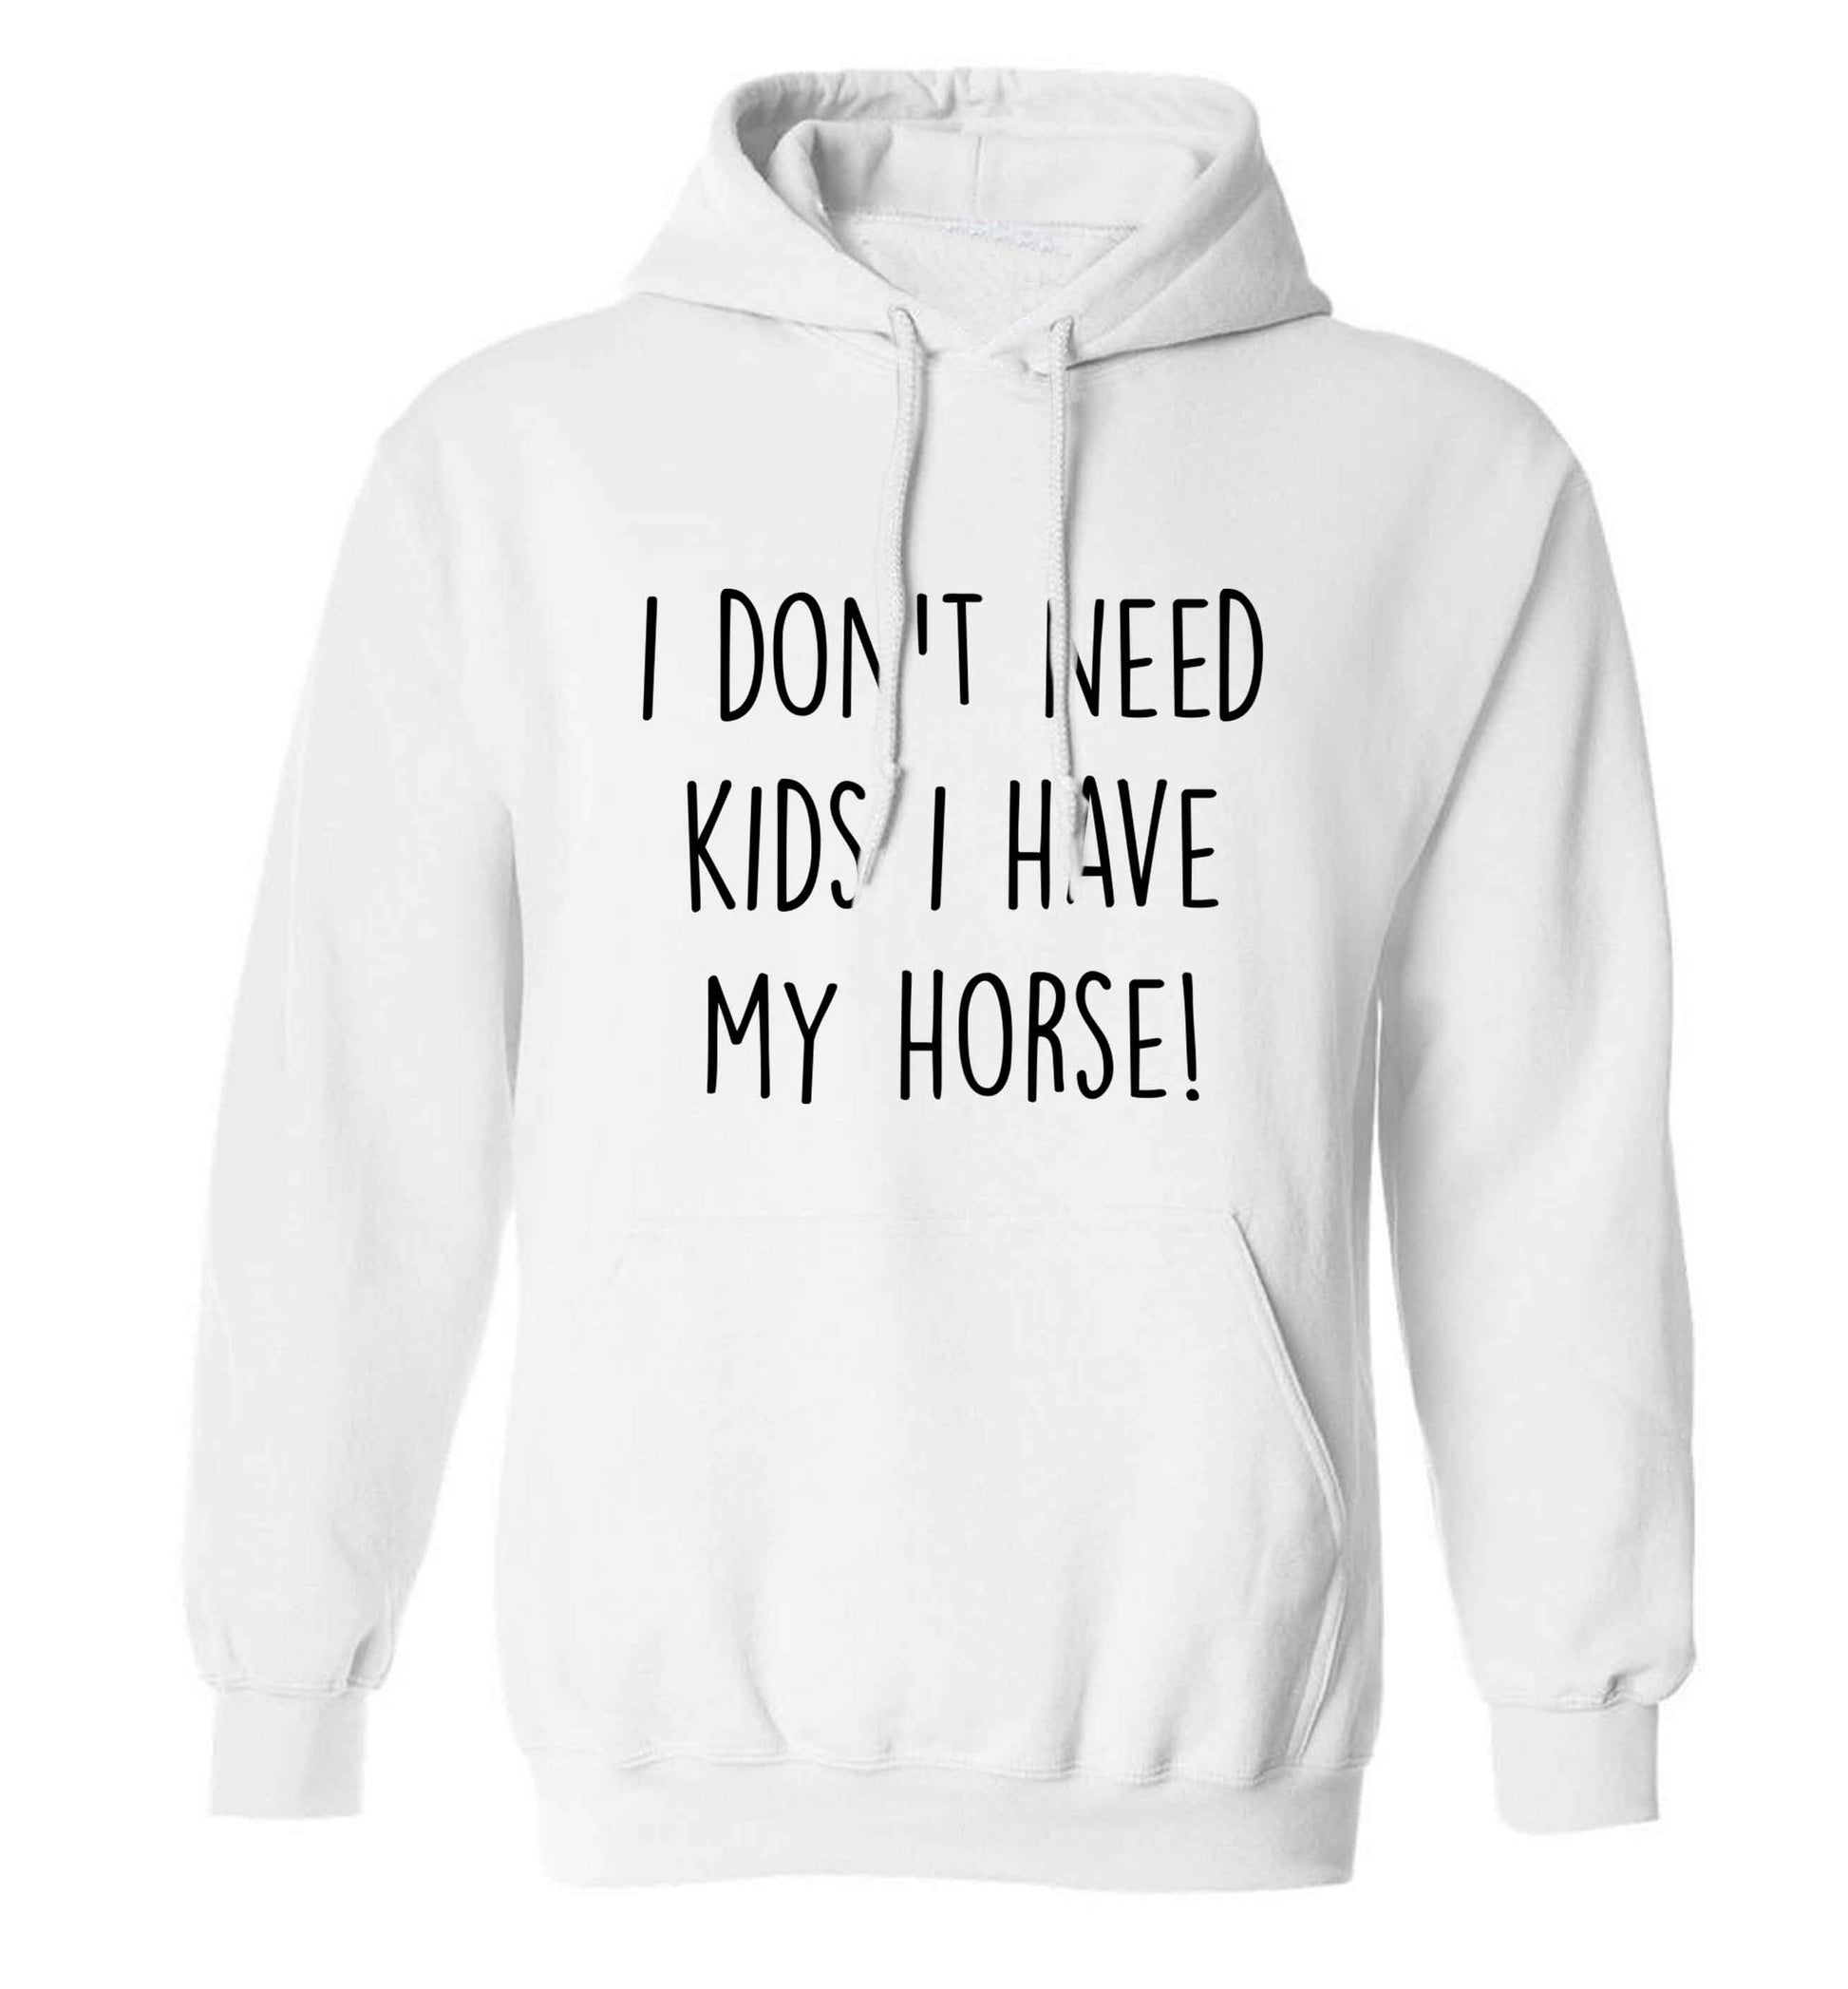 I don't need kids I have my horse adults unisex white hoodie 2XL